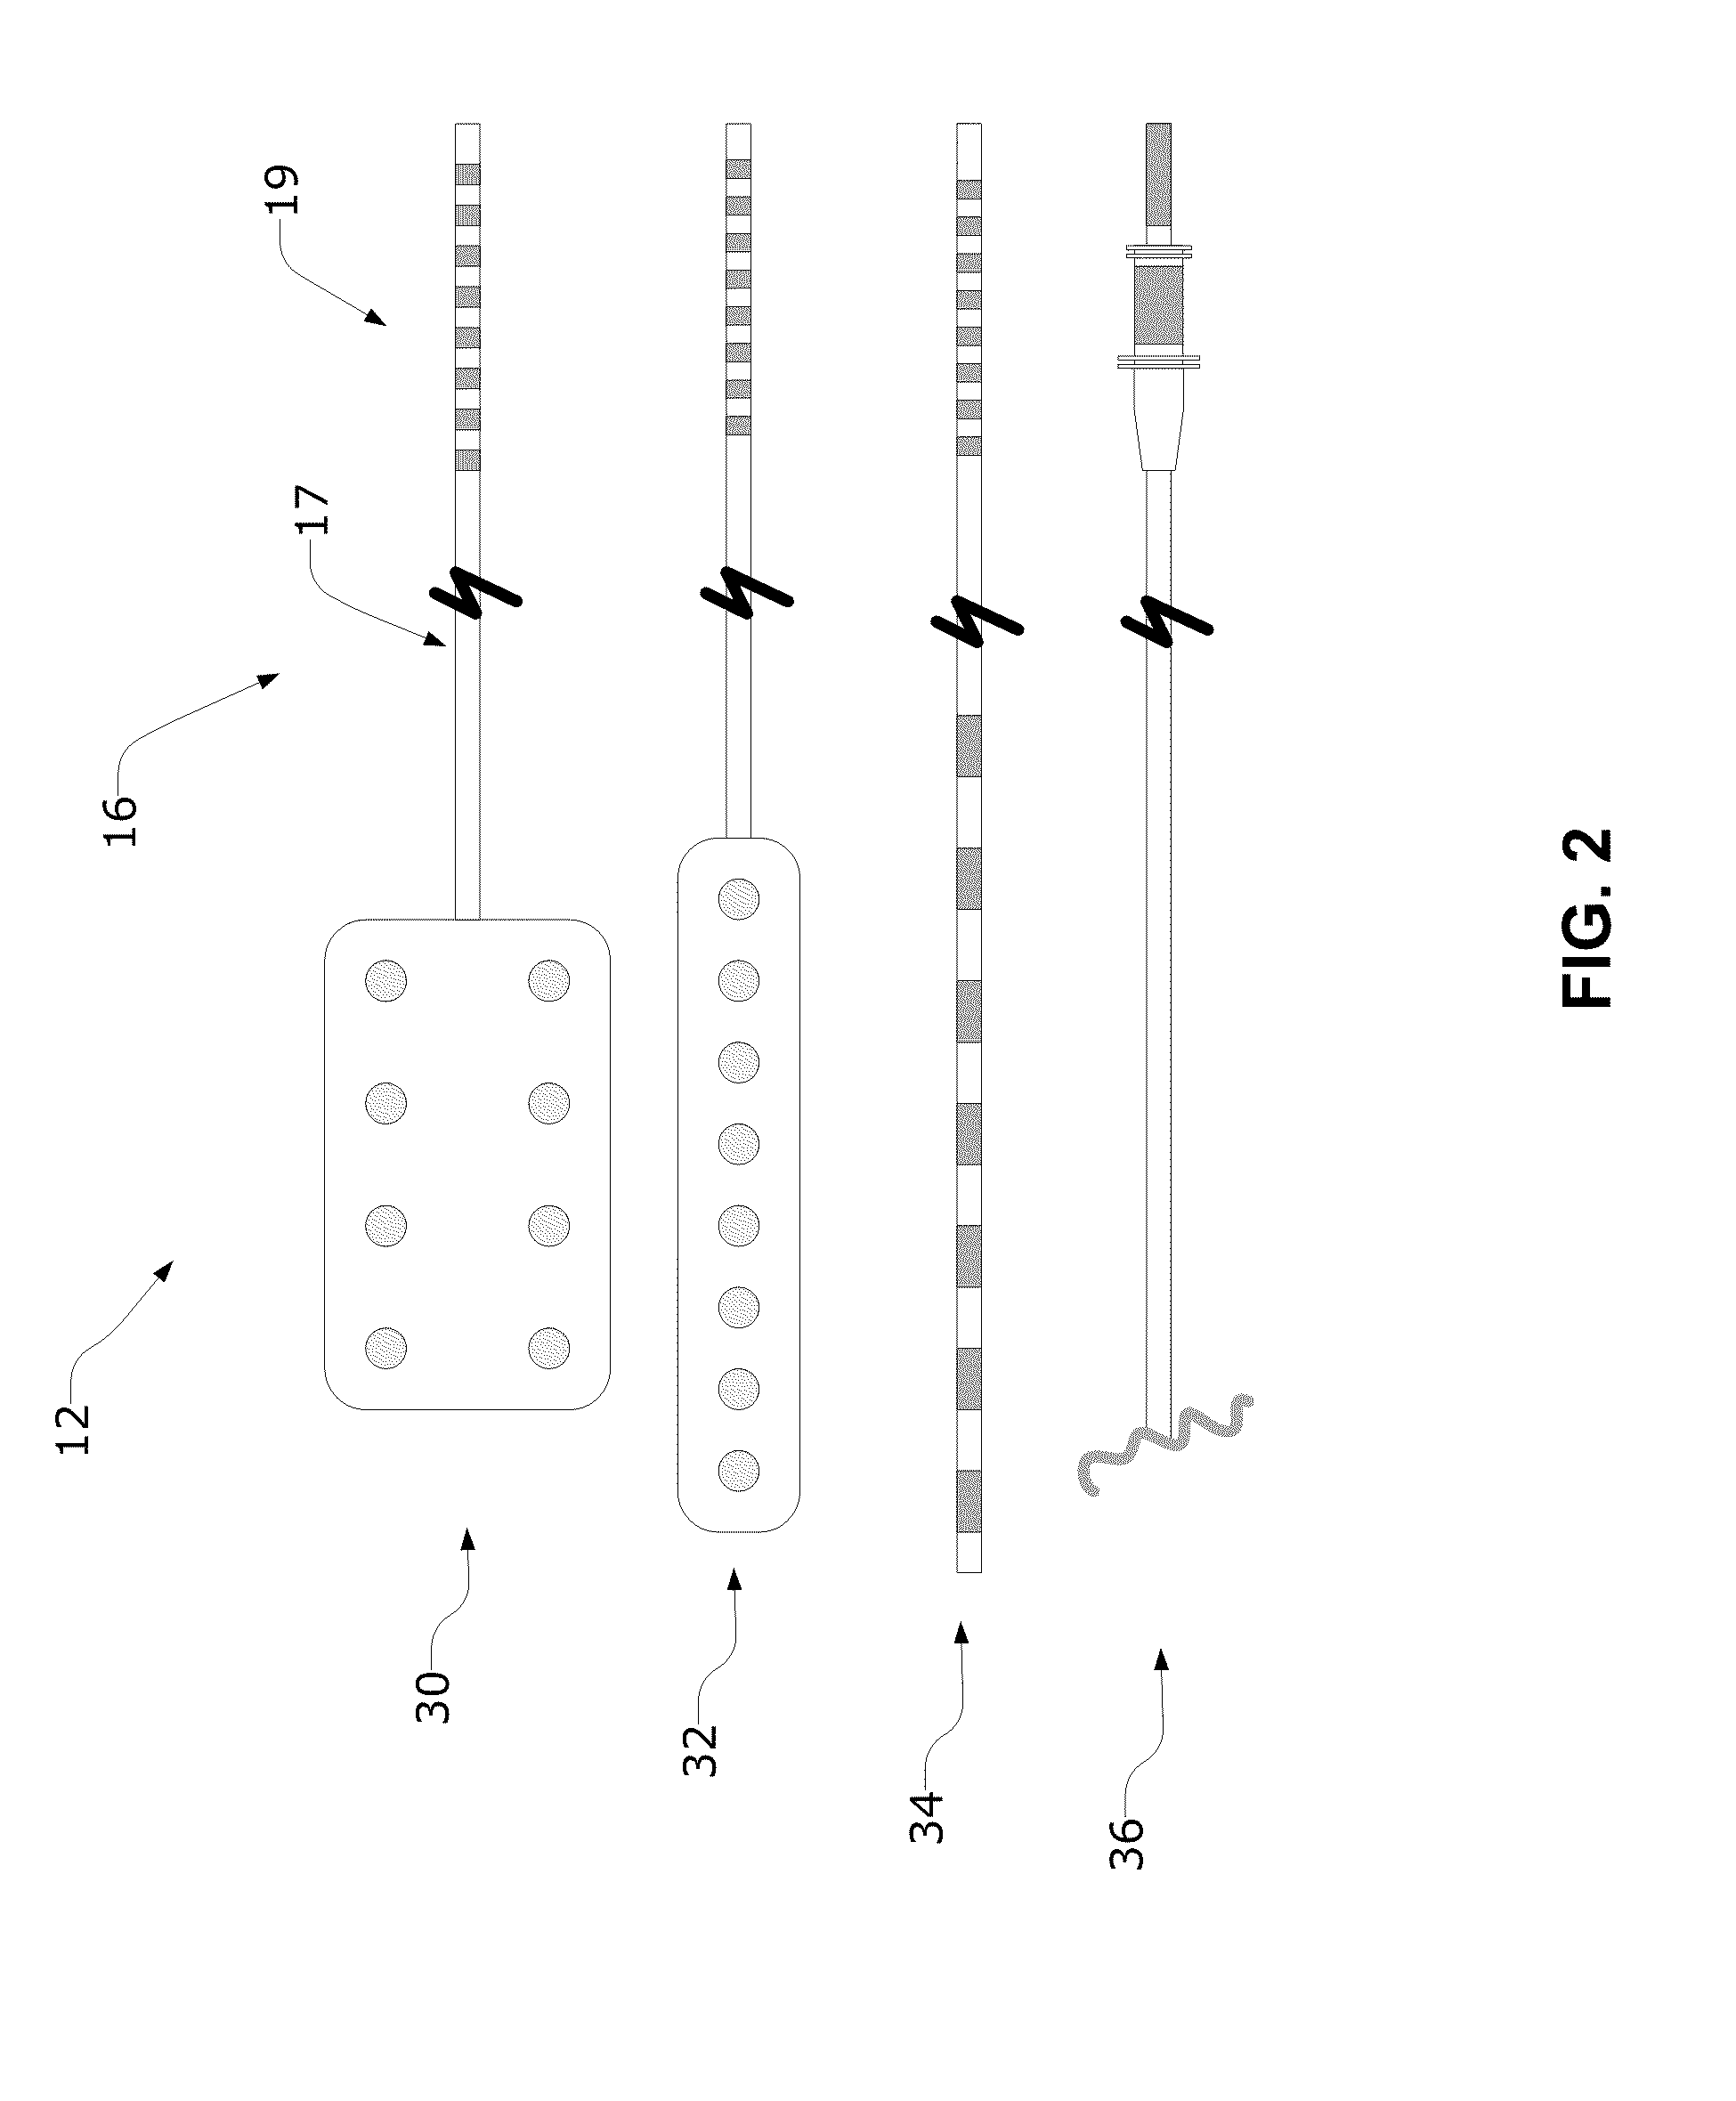 Communication Error Alerting in an Epilepsy Monitoring System